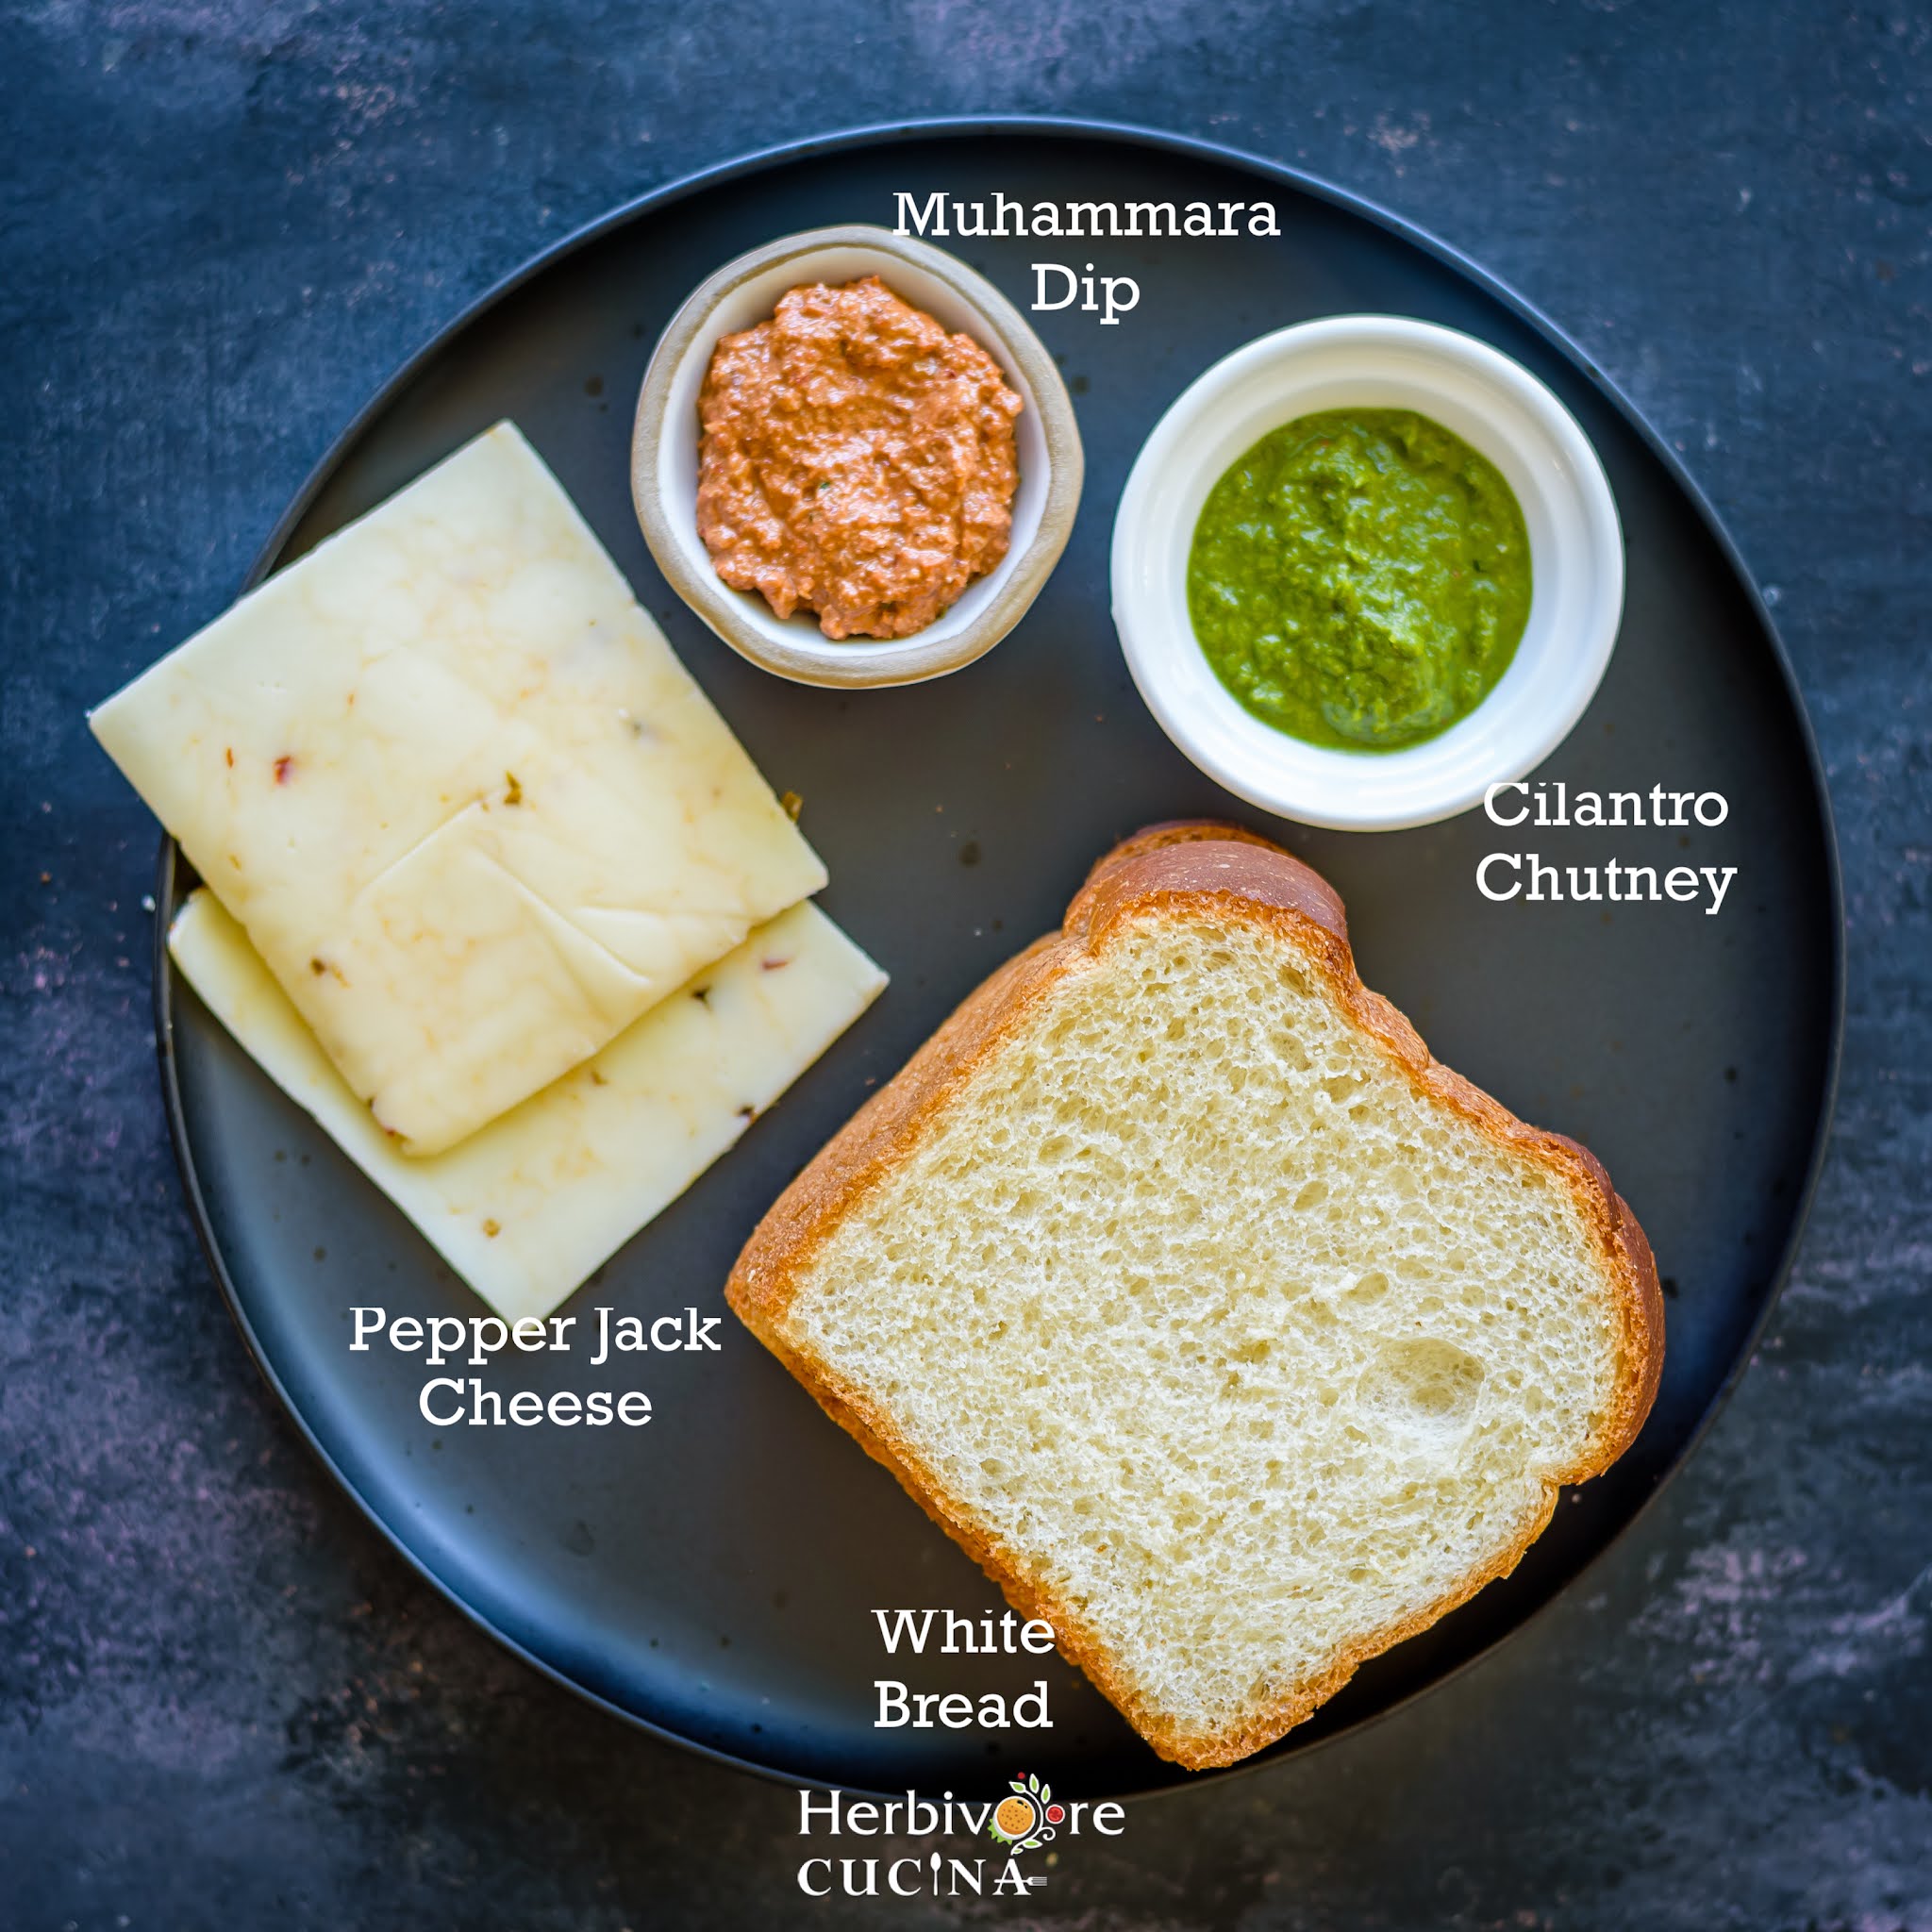 Ingredients for Tricolor Sandwiches